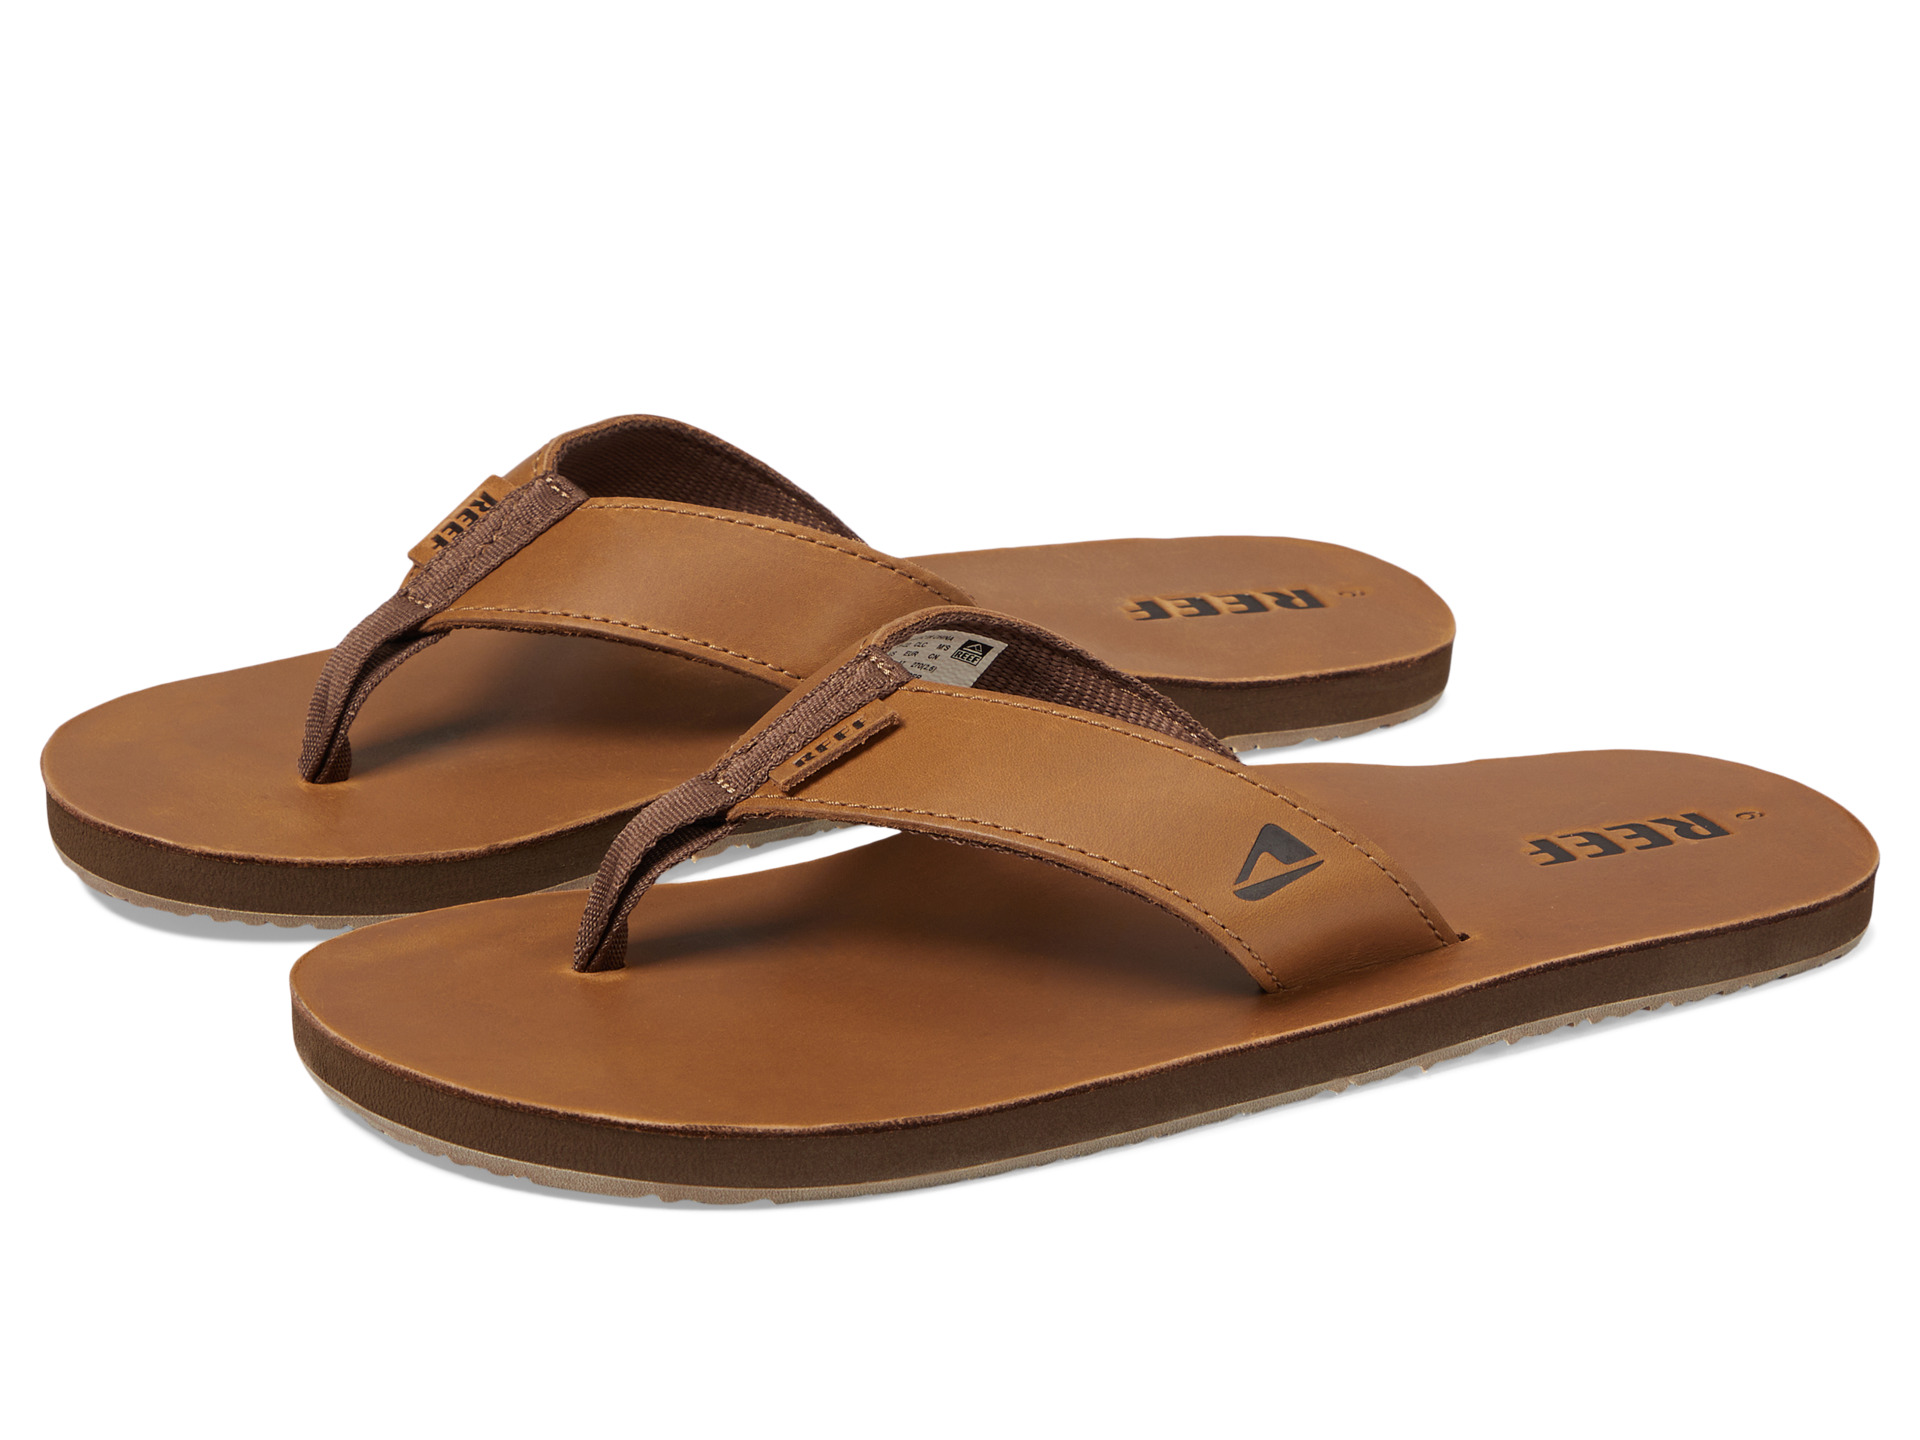 Reef Reef Leather Smoothy - Zappos Free Shipping BOTH Ways